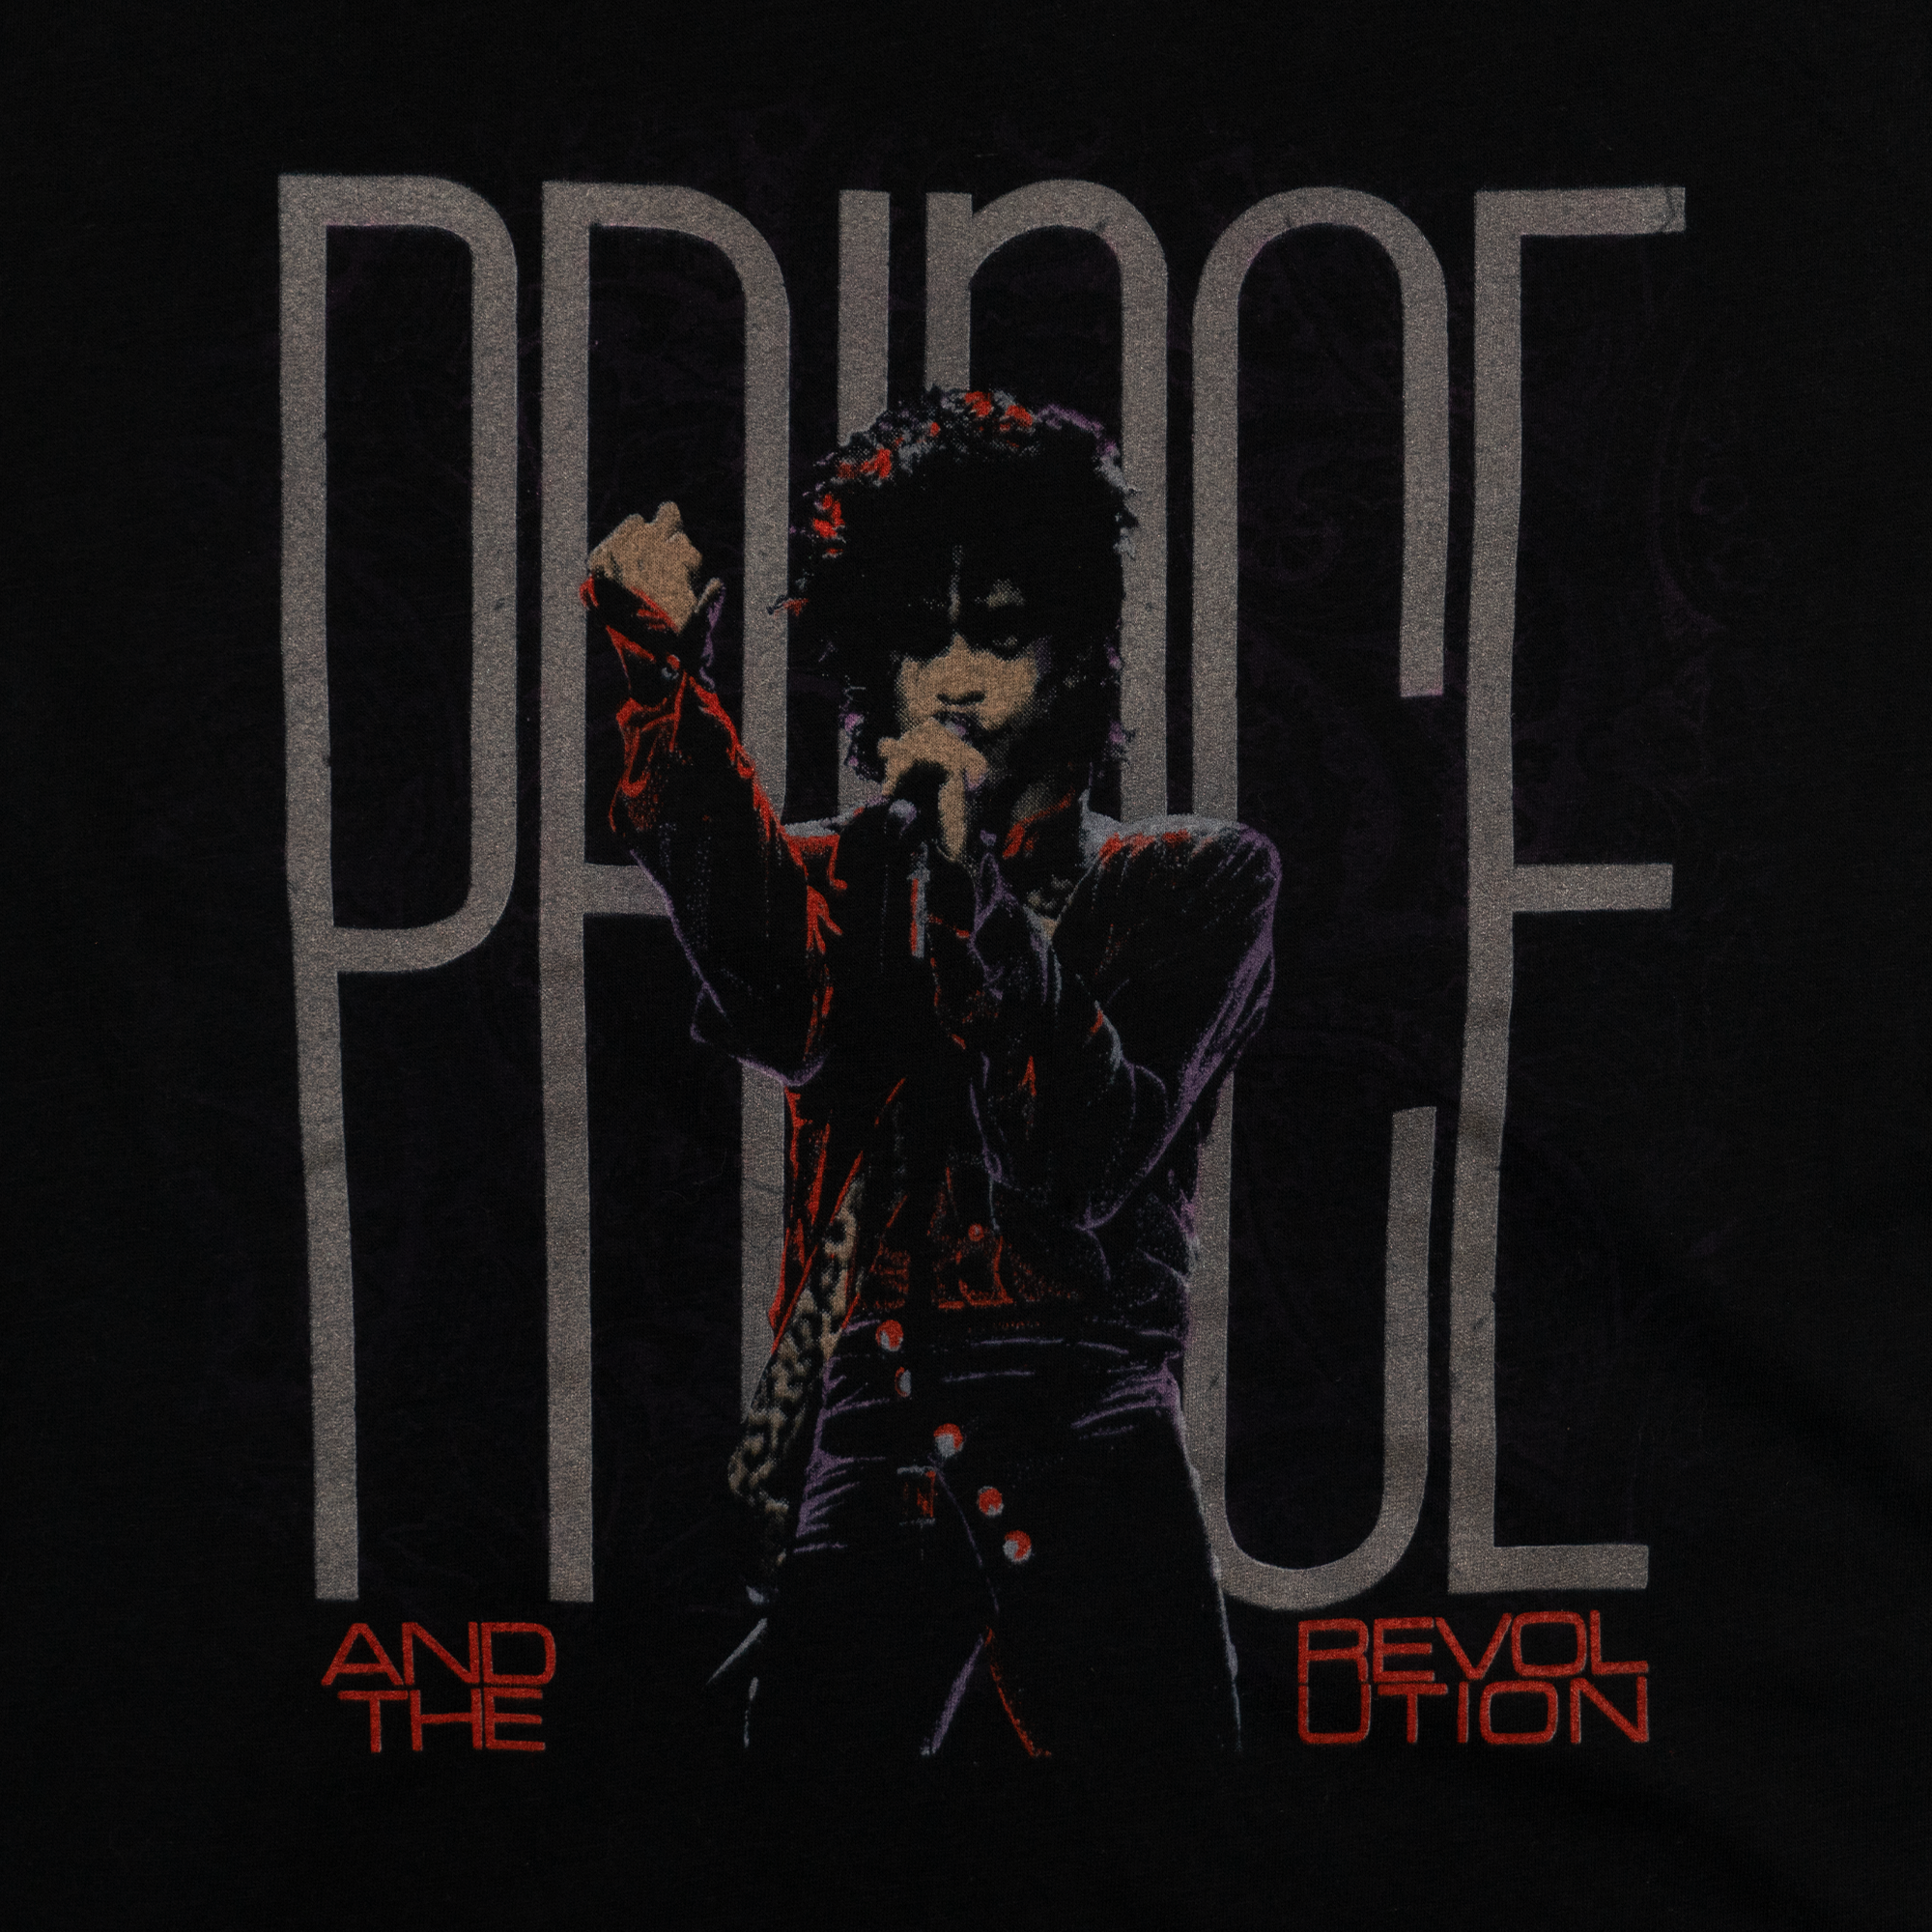 Prince And The Revolution Tee Black-PLUS